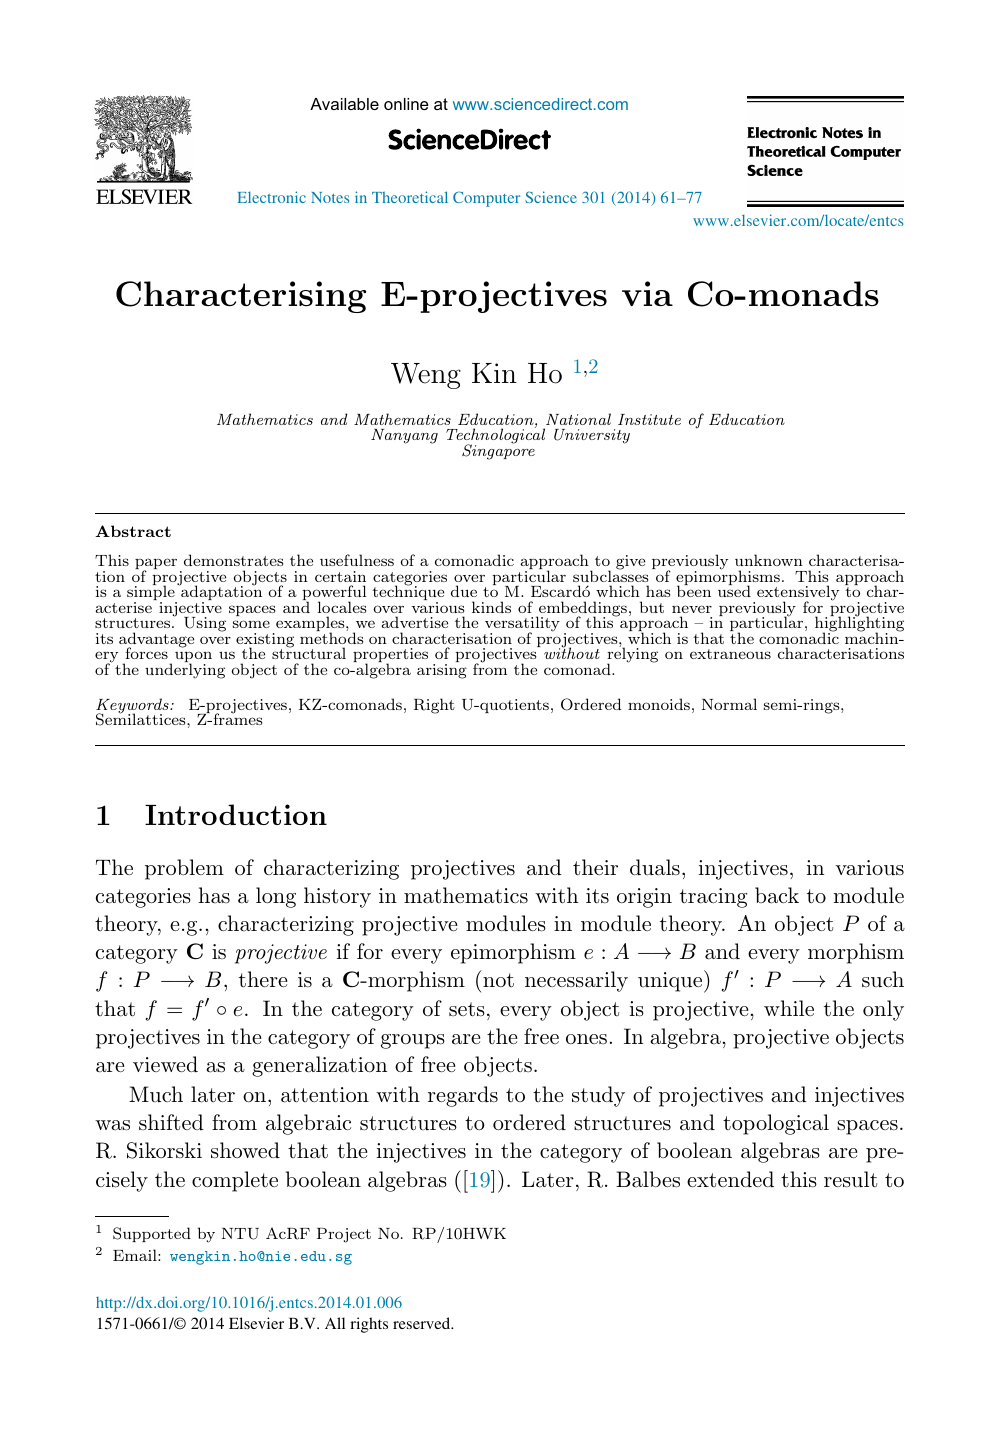 Characterising E Projectives Via Co Monads Topic Of Research Paper In Mathematics Download Scholarly Article Pdf And Read For Free On Cyberleninka Open Science Hub